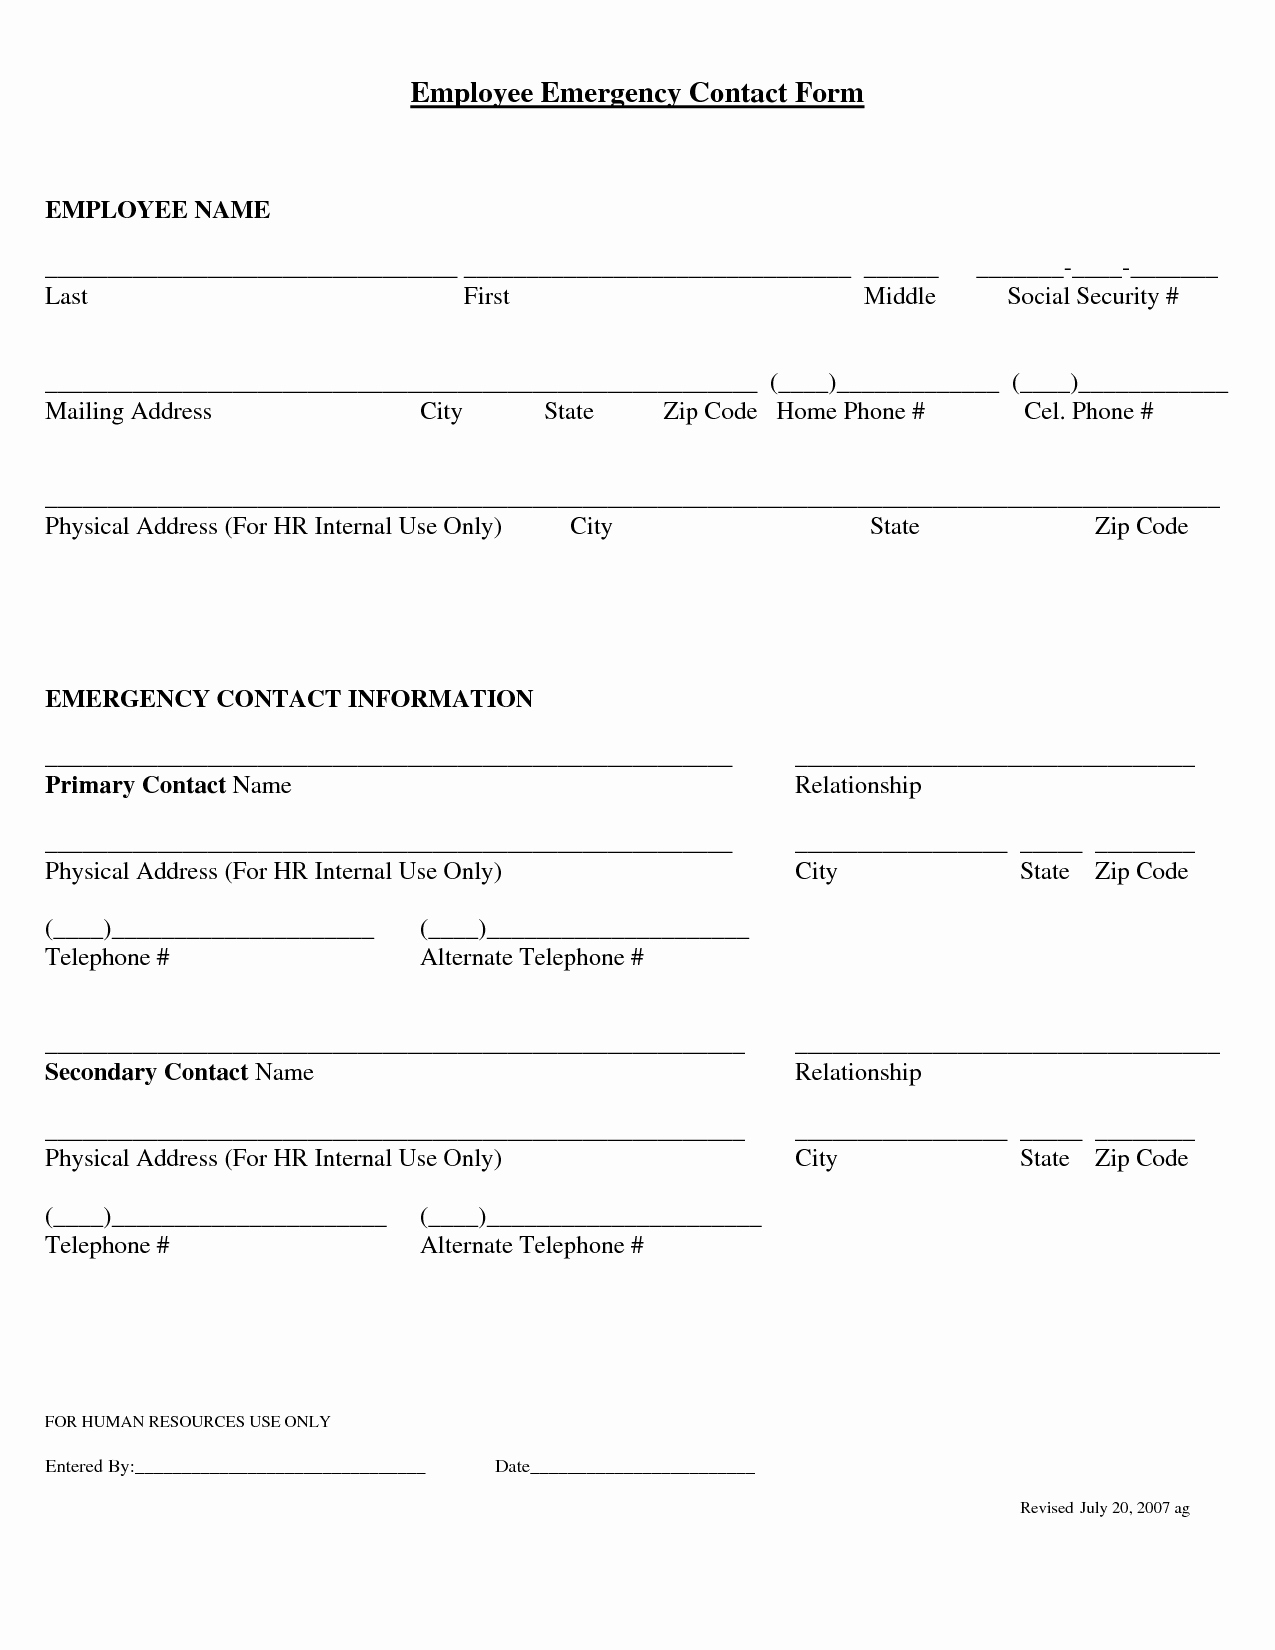 Employee Emergency Contact form Template Awesome Employee Emergency Contact Printable form to Pin